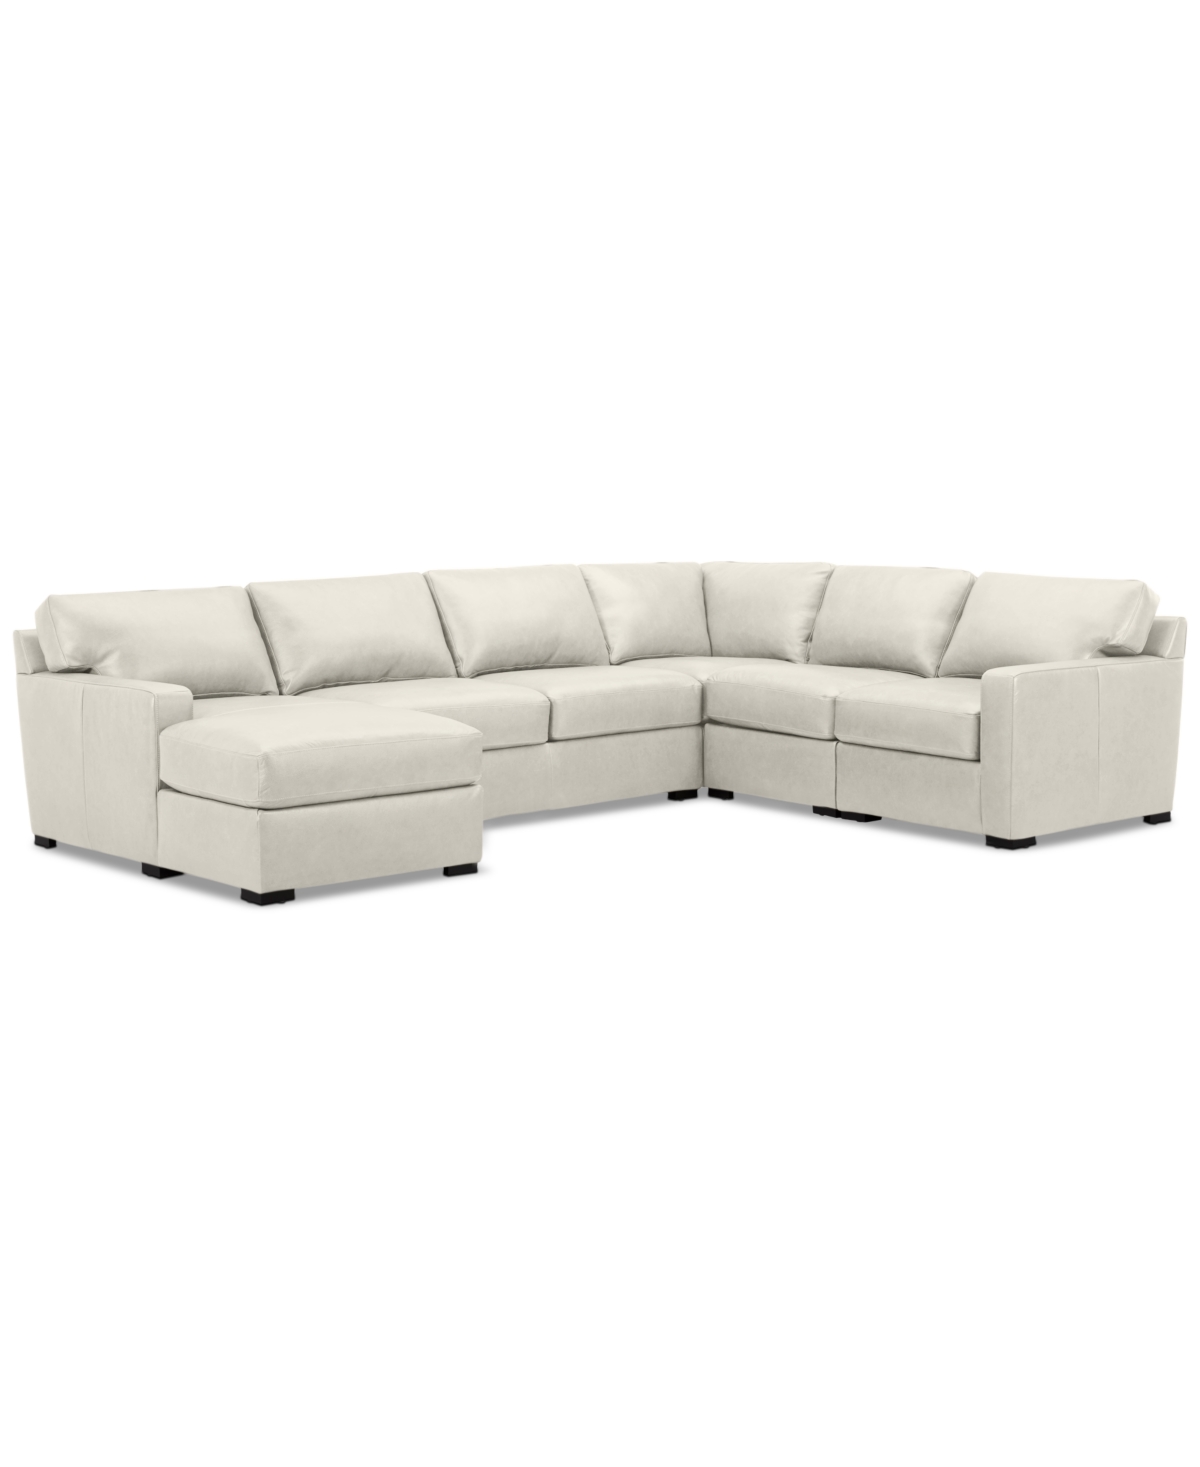 Macy's Radley 136" 5-pc. Leather Square Corner Modular Chase Sectional, Created For  In Coconut Milk